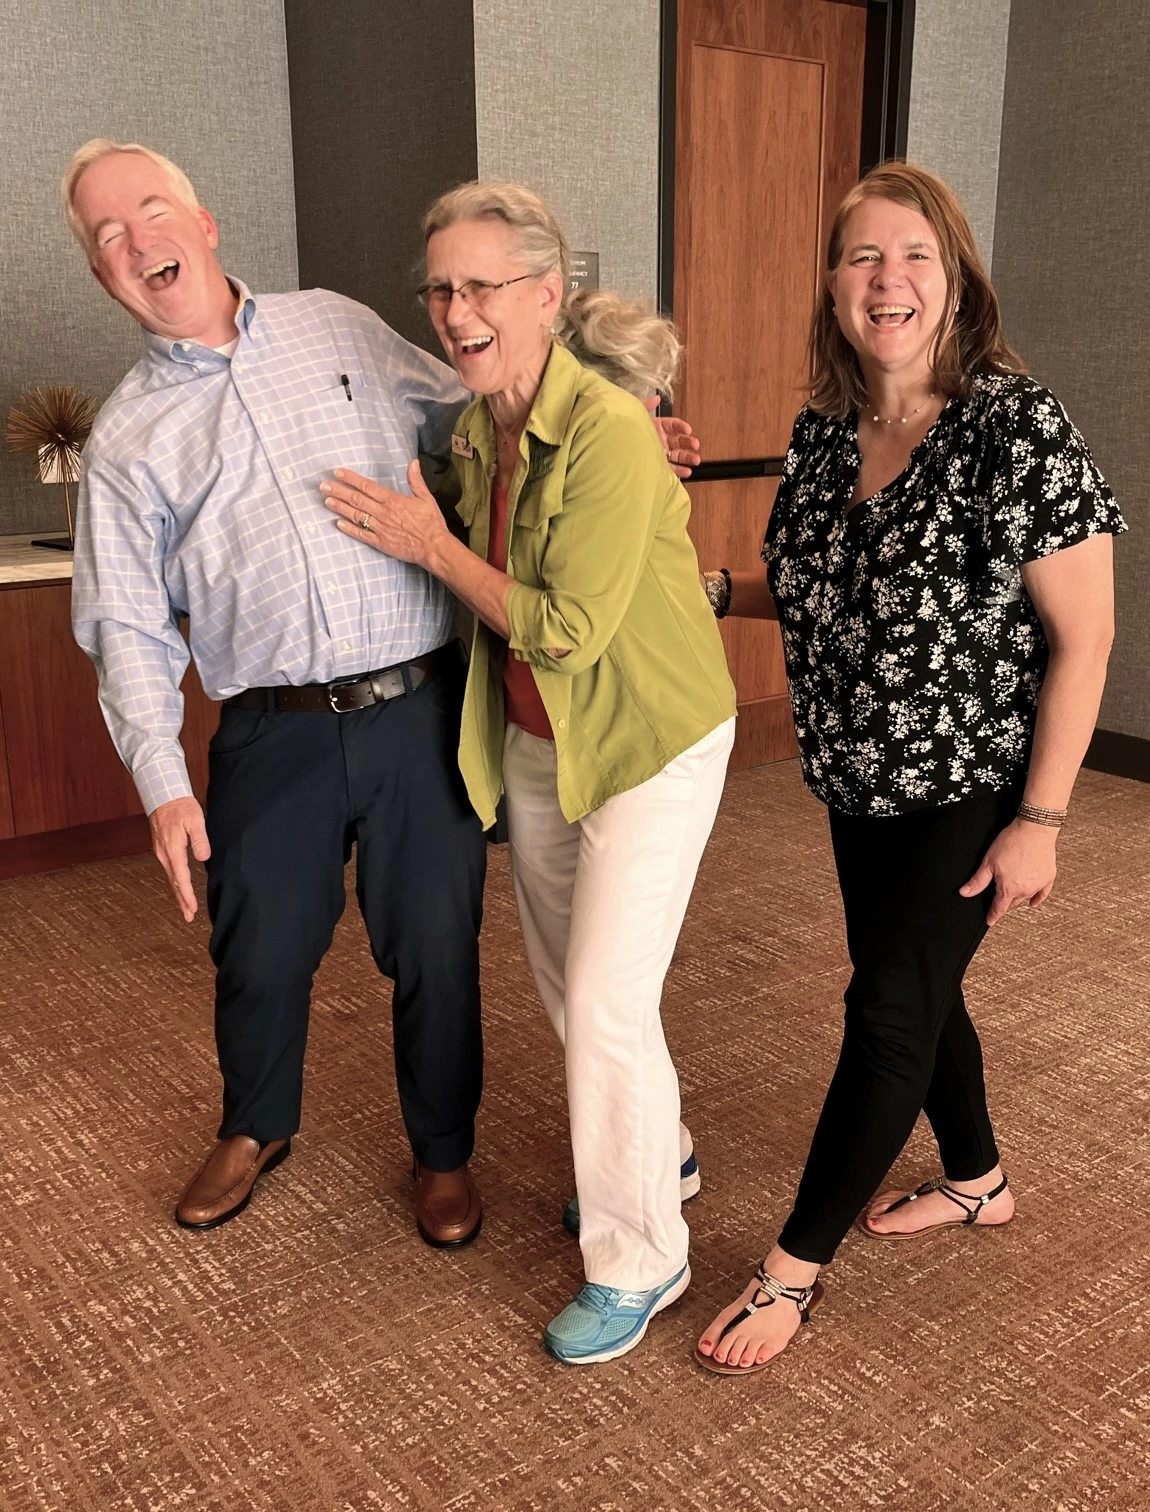 Having a little fun with Teepa Snow, one of the foremost experts in dementia and Alzheimer's Care.